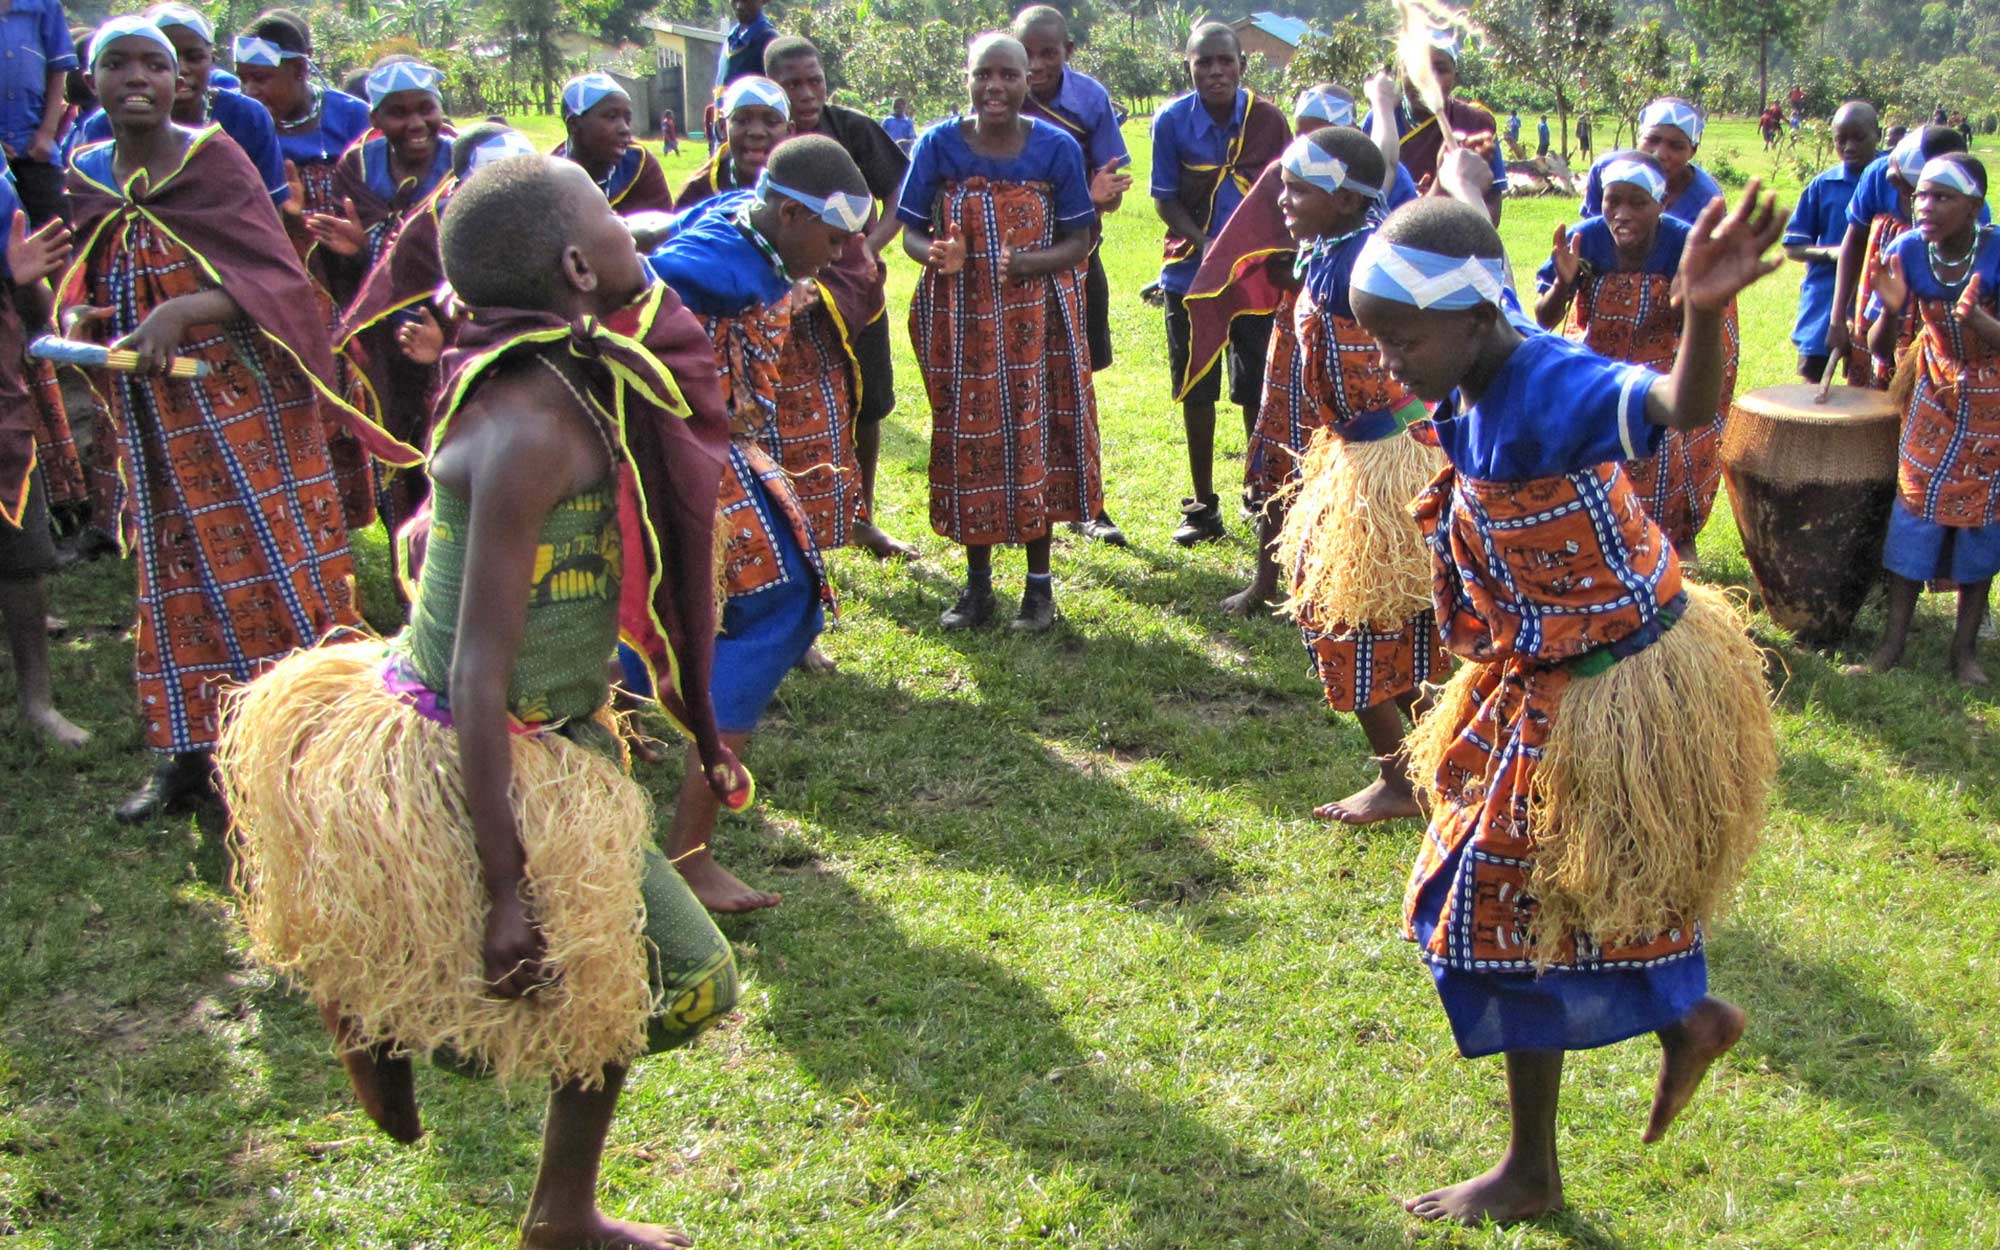 Children wearing colorful blue blue tunics and red scores with grass skirts engage in a traditional dance in Rubuguri Uganda